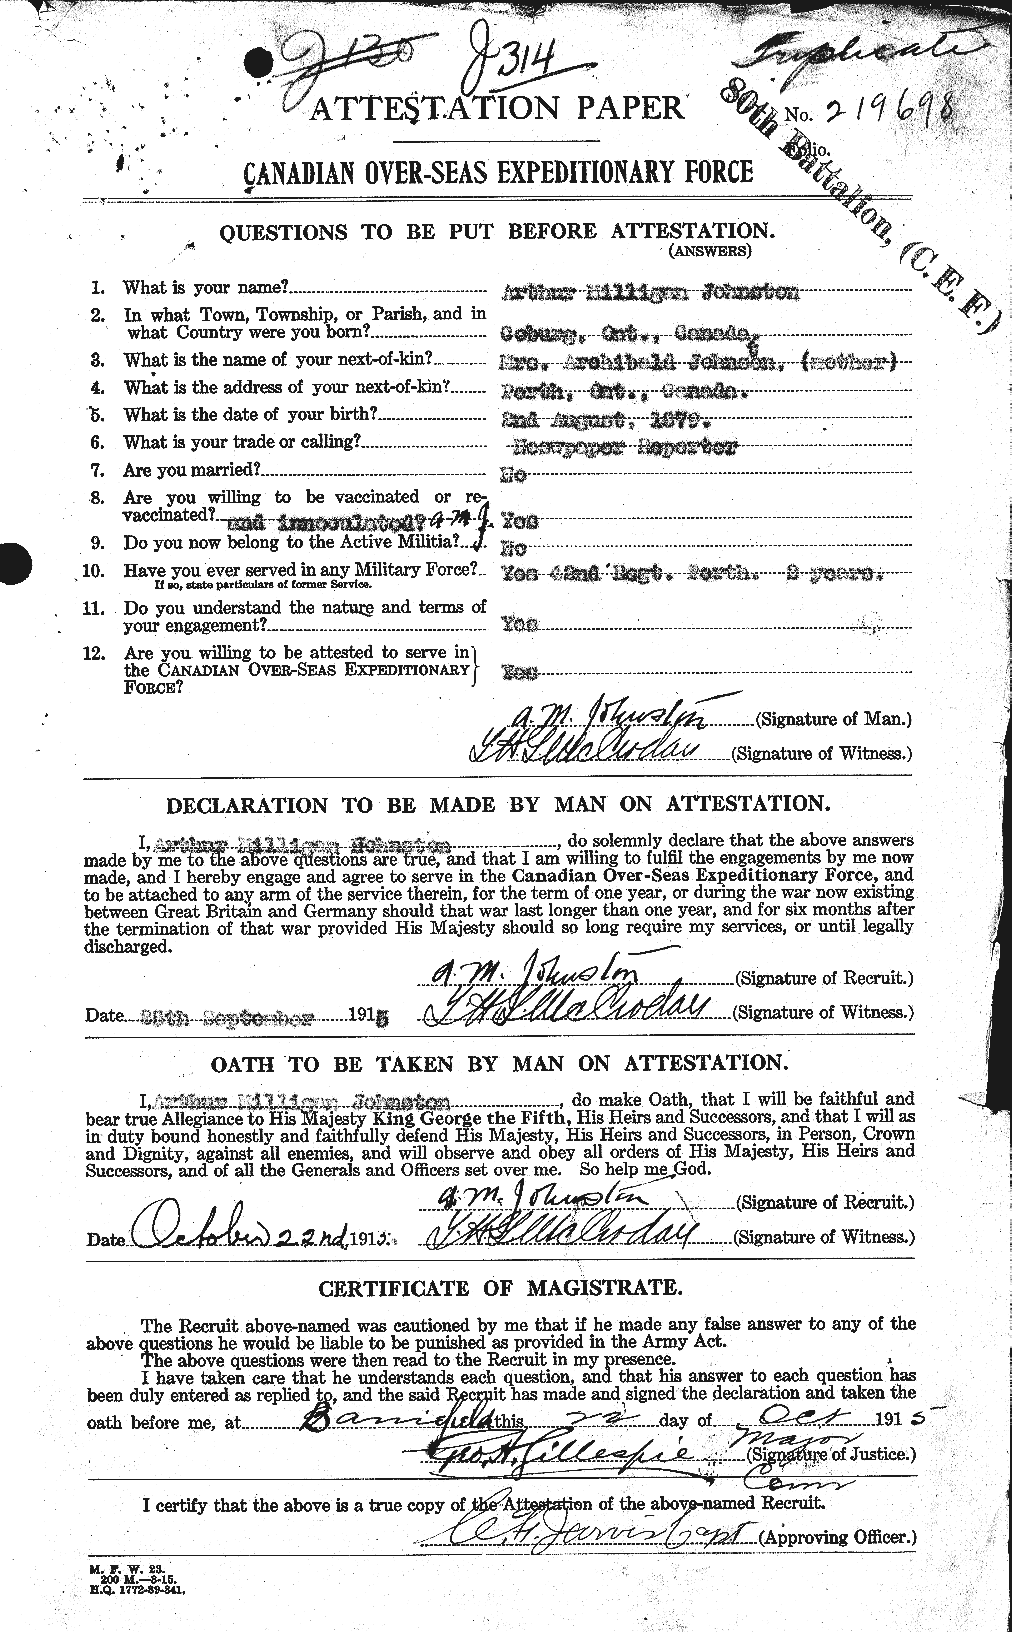 Personnel Records of the First World War - CEF 421050a